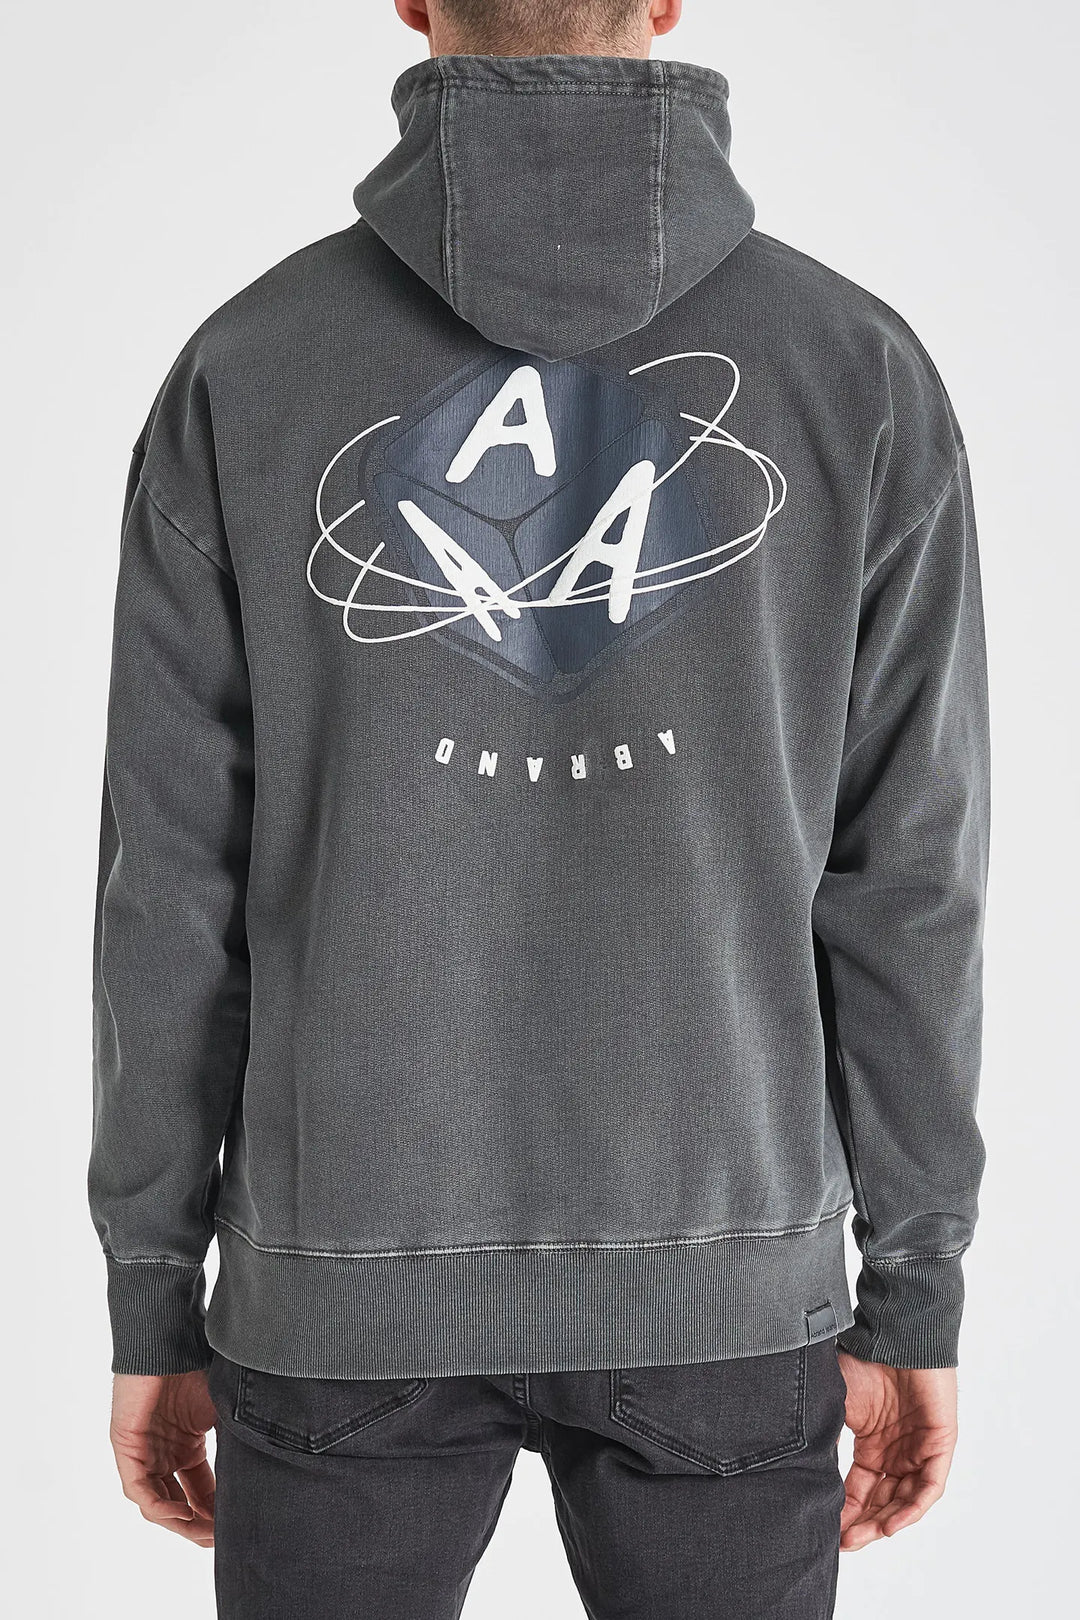 A Relaxed Hoodie- Washed Black